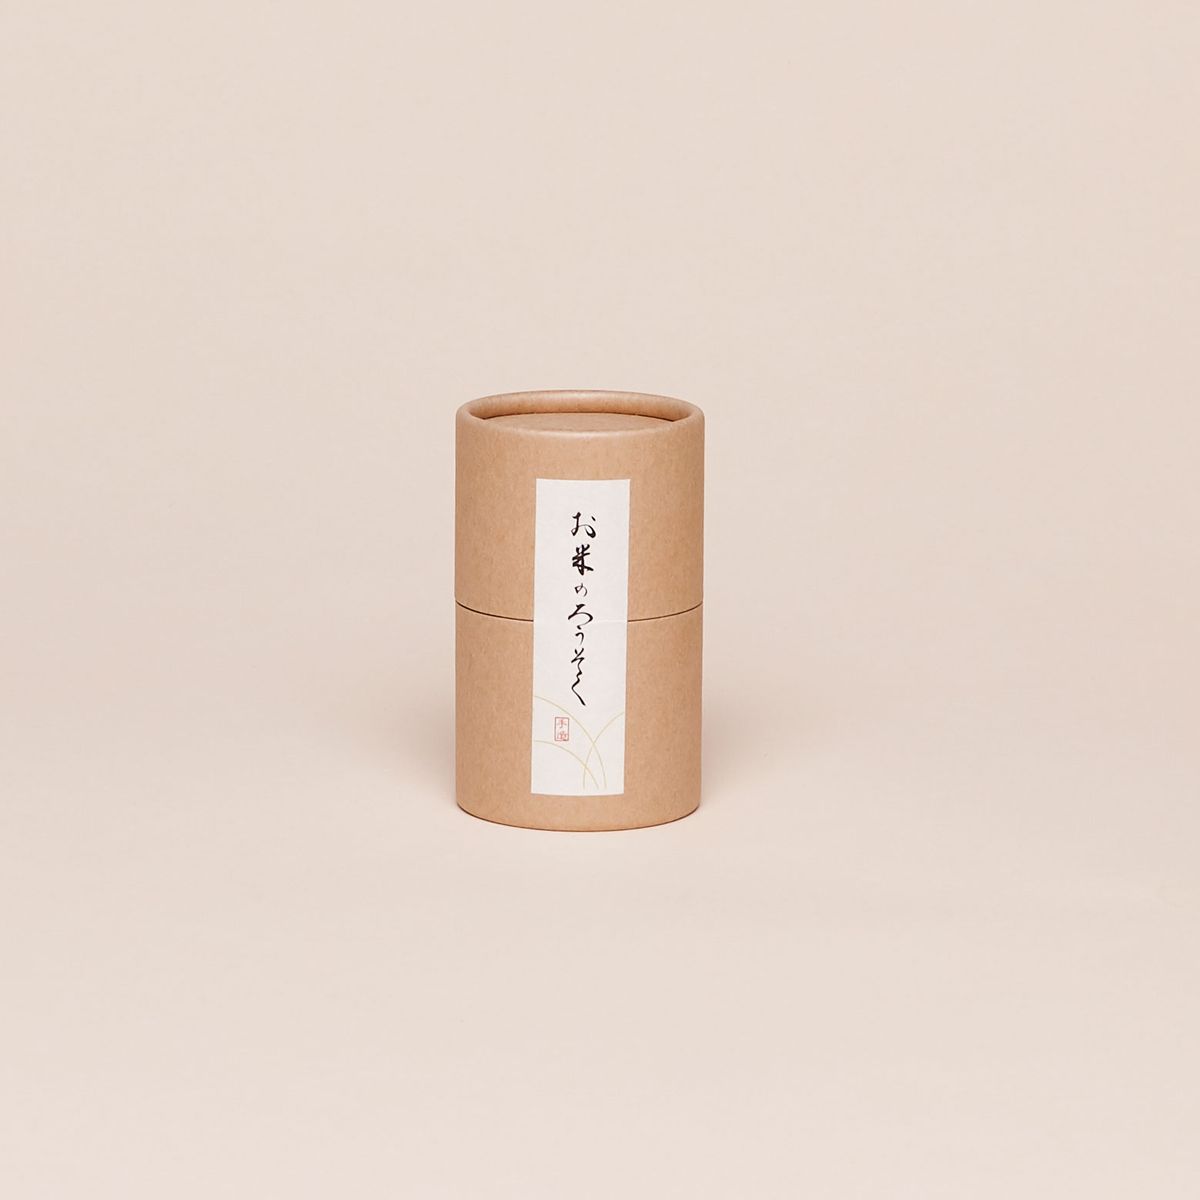 A brown cylindrical container with a white label with Japanese words